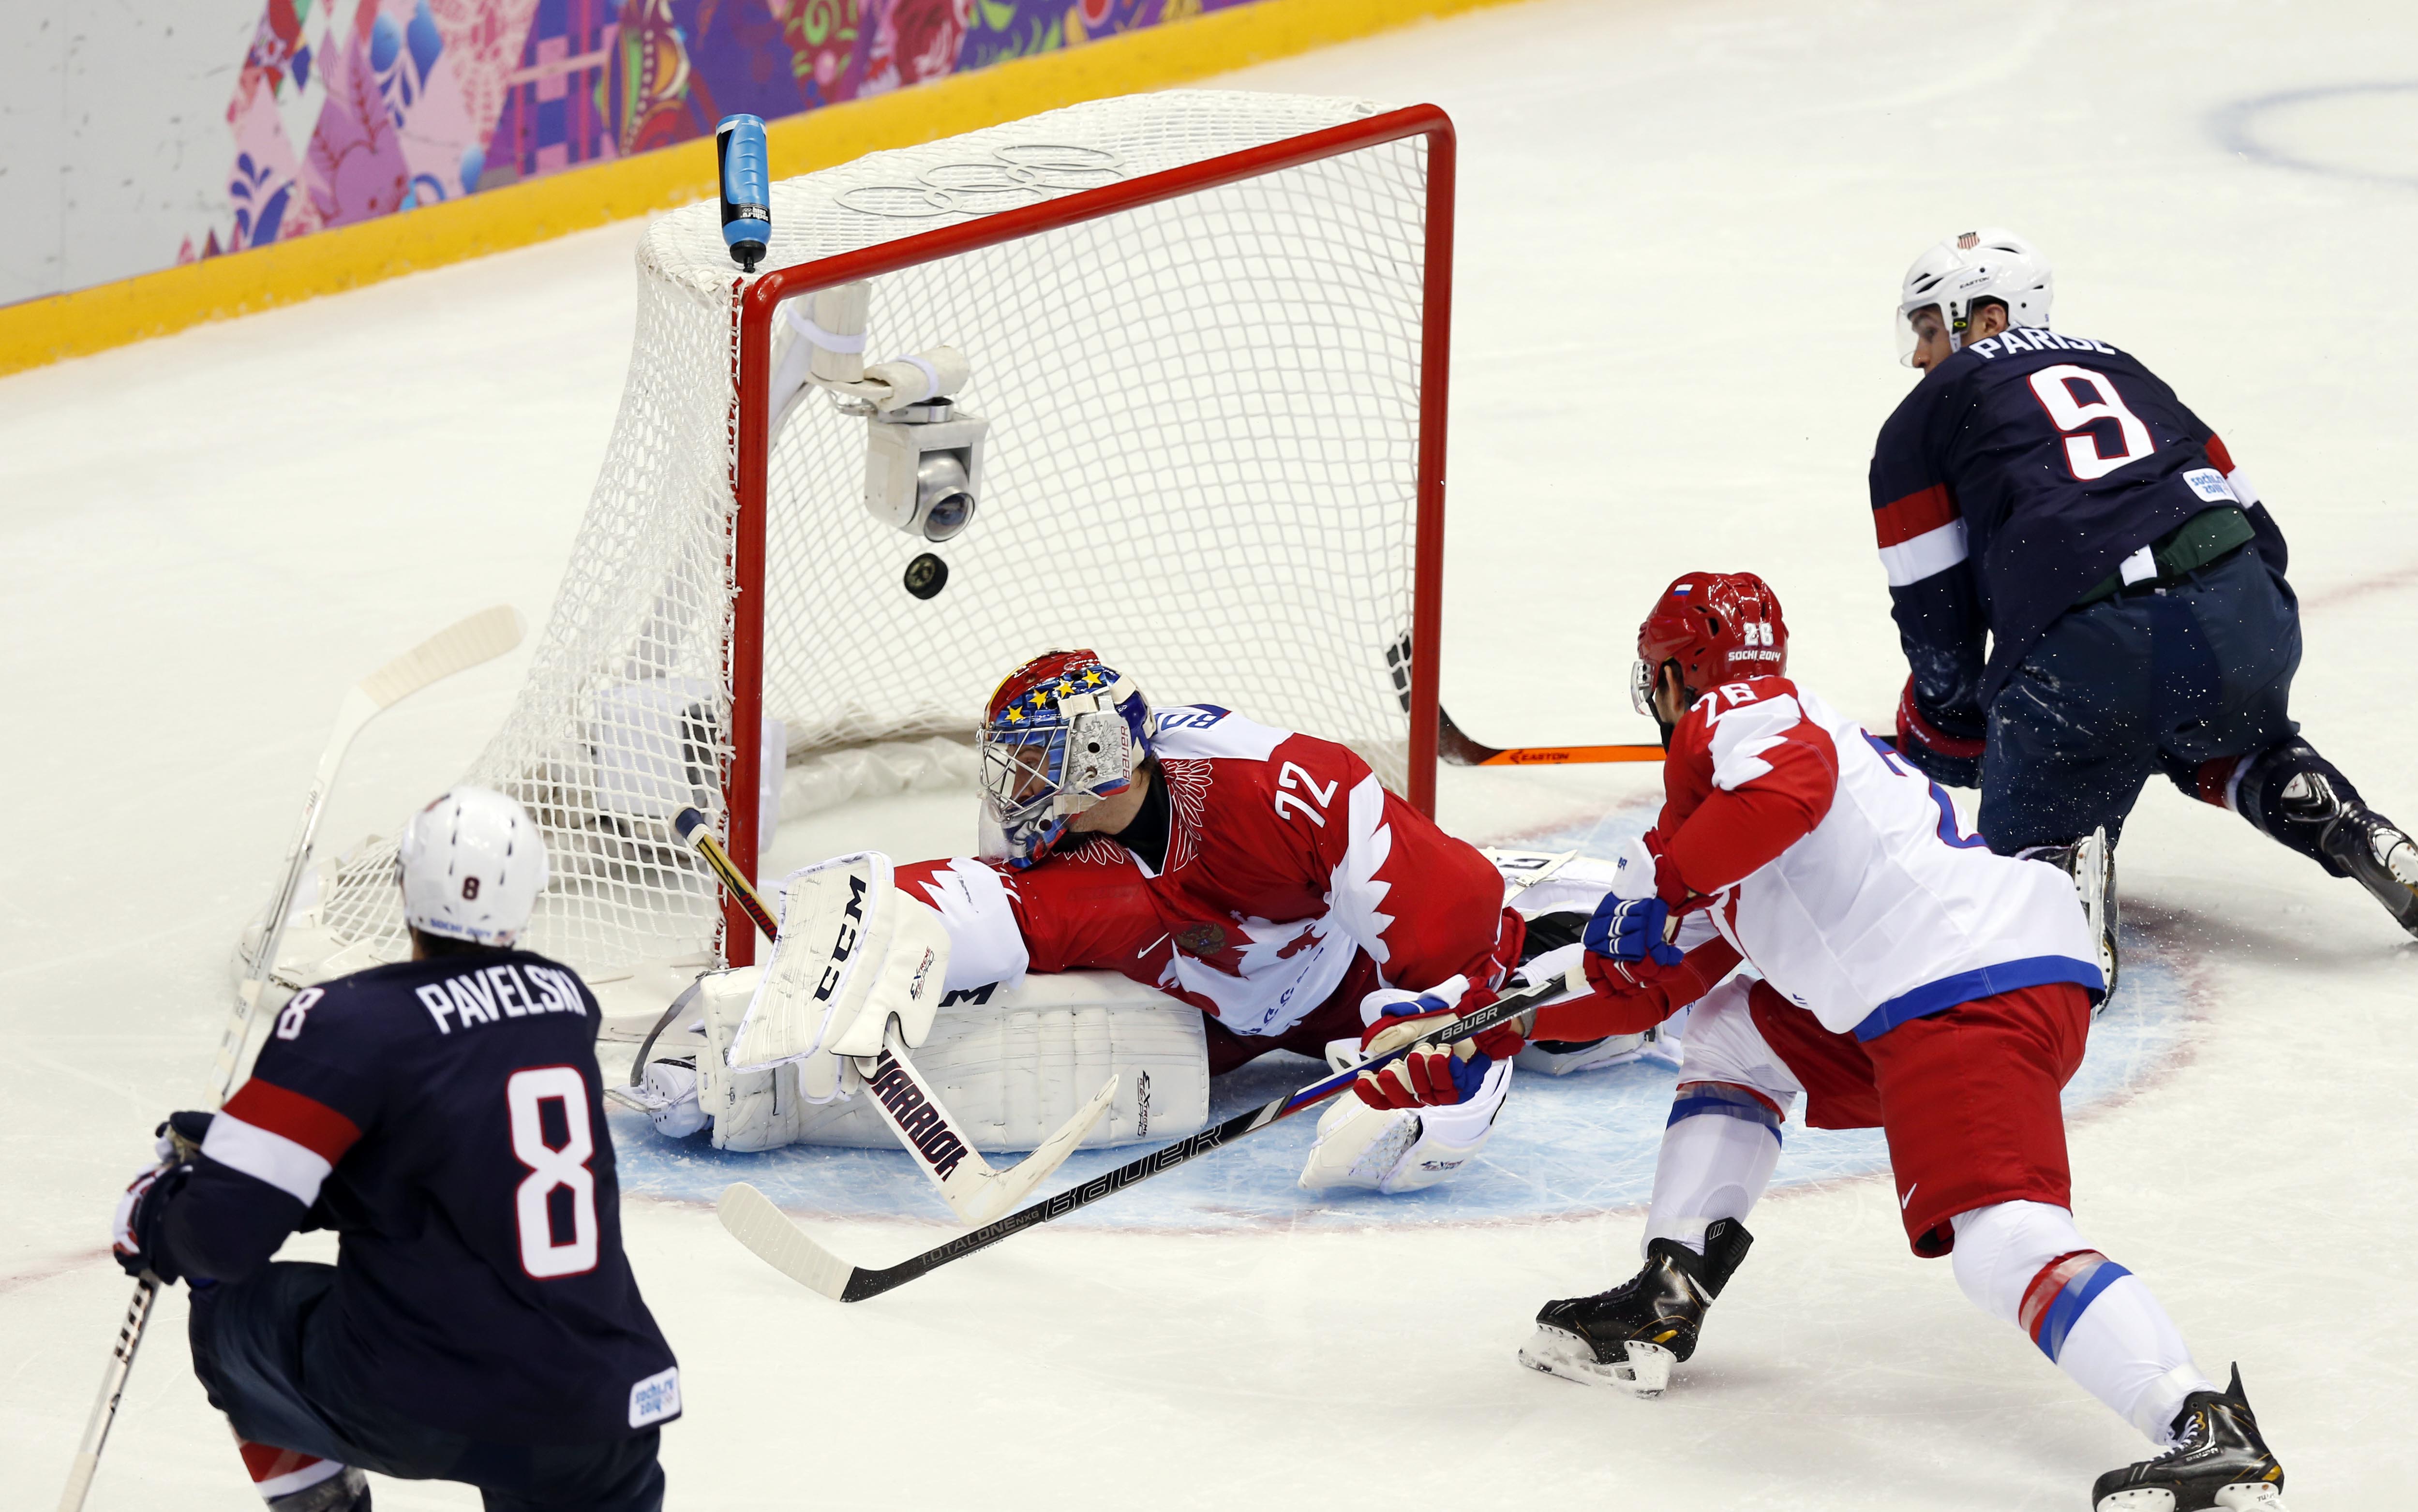 T.J. Oshie the hero as USA outlasts Russia in epic shootout